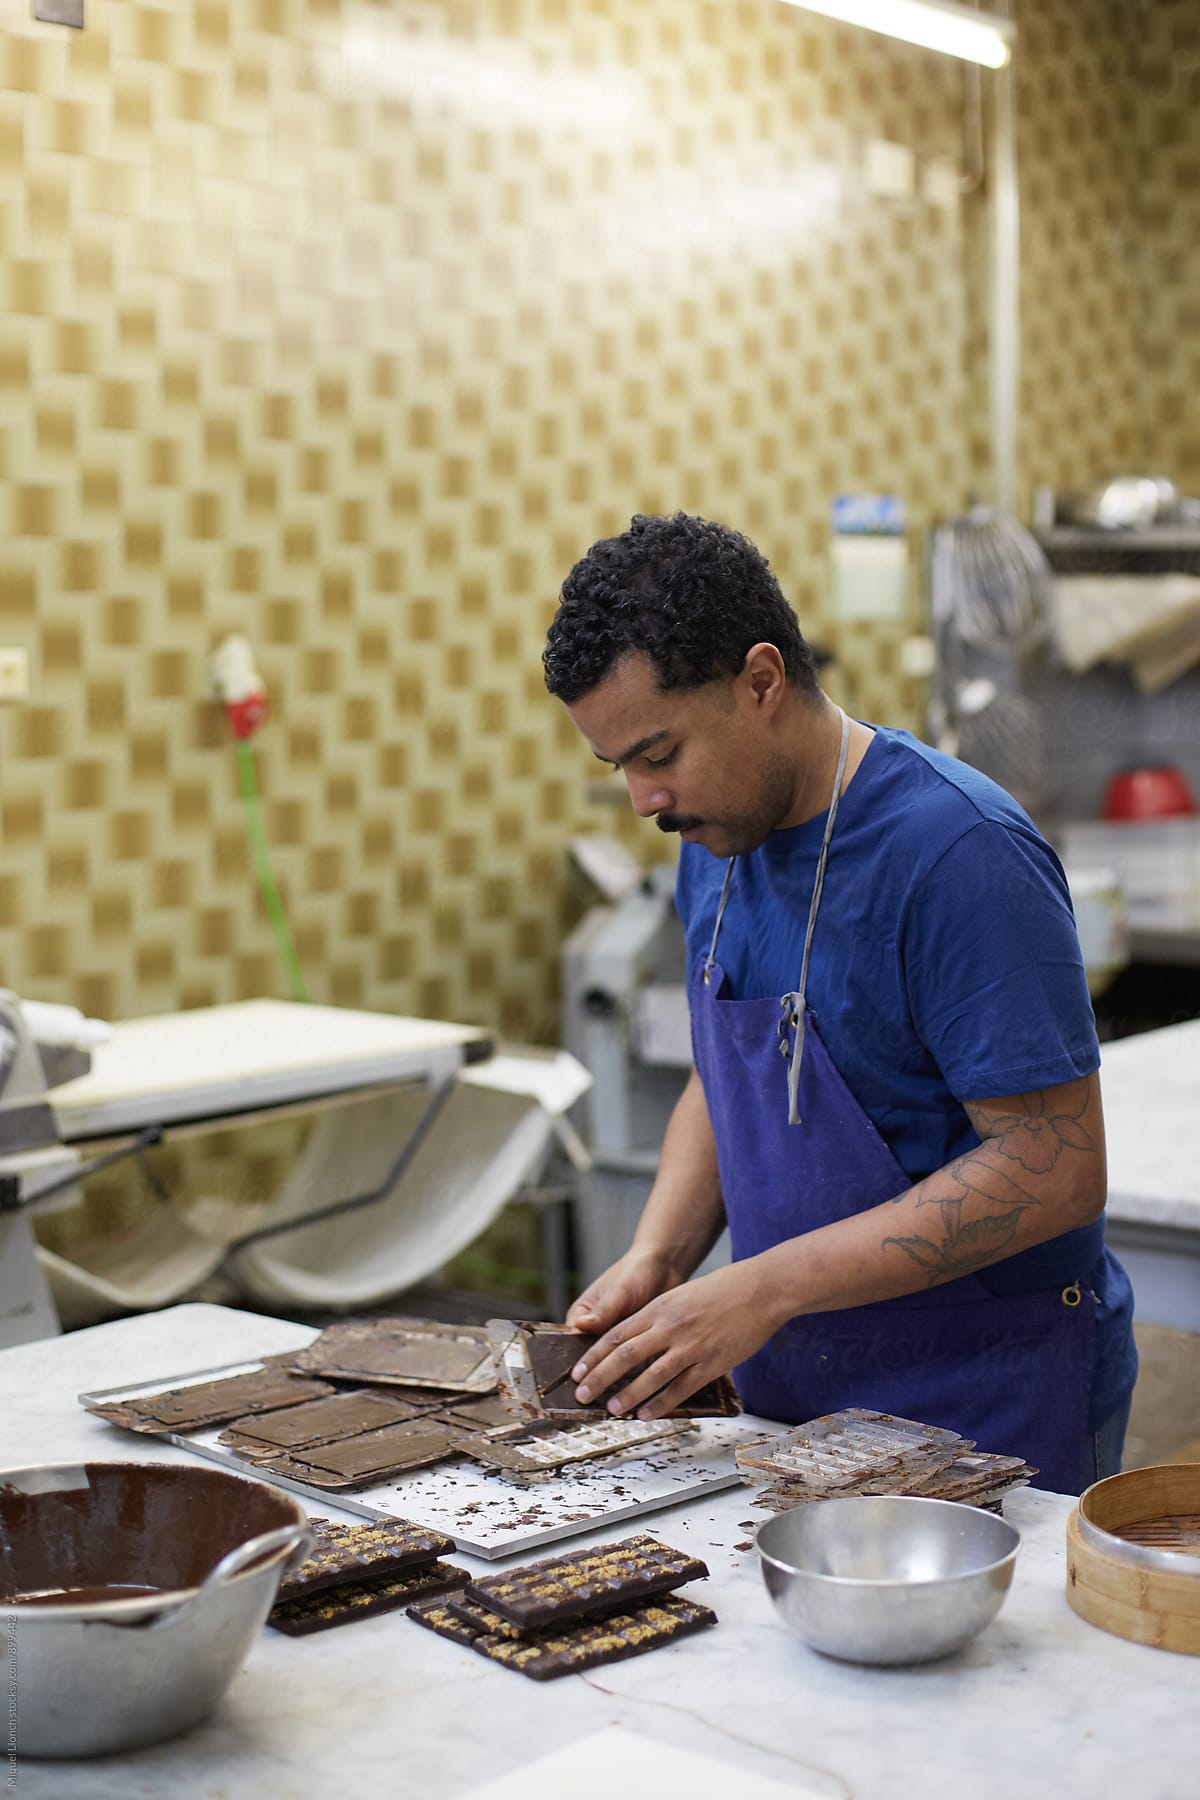 Chocolate artisan working in the workshop